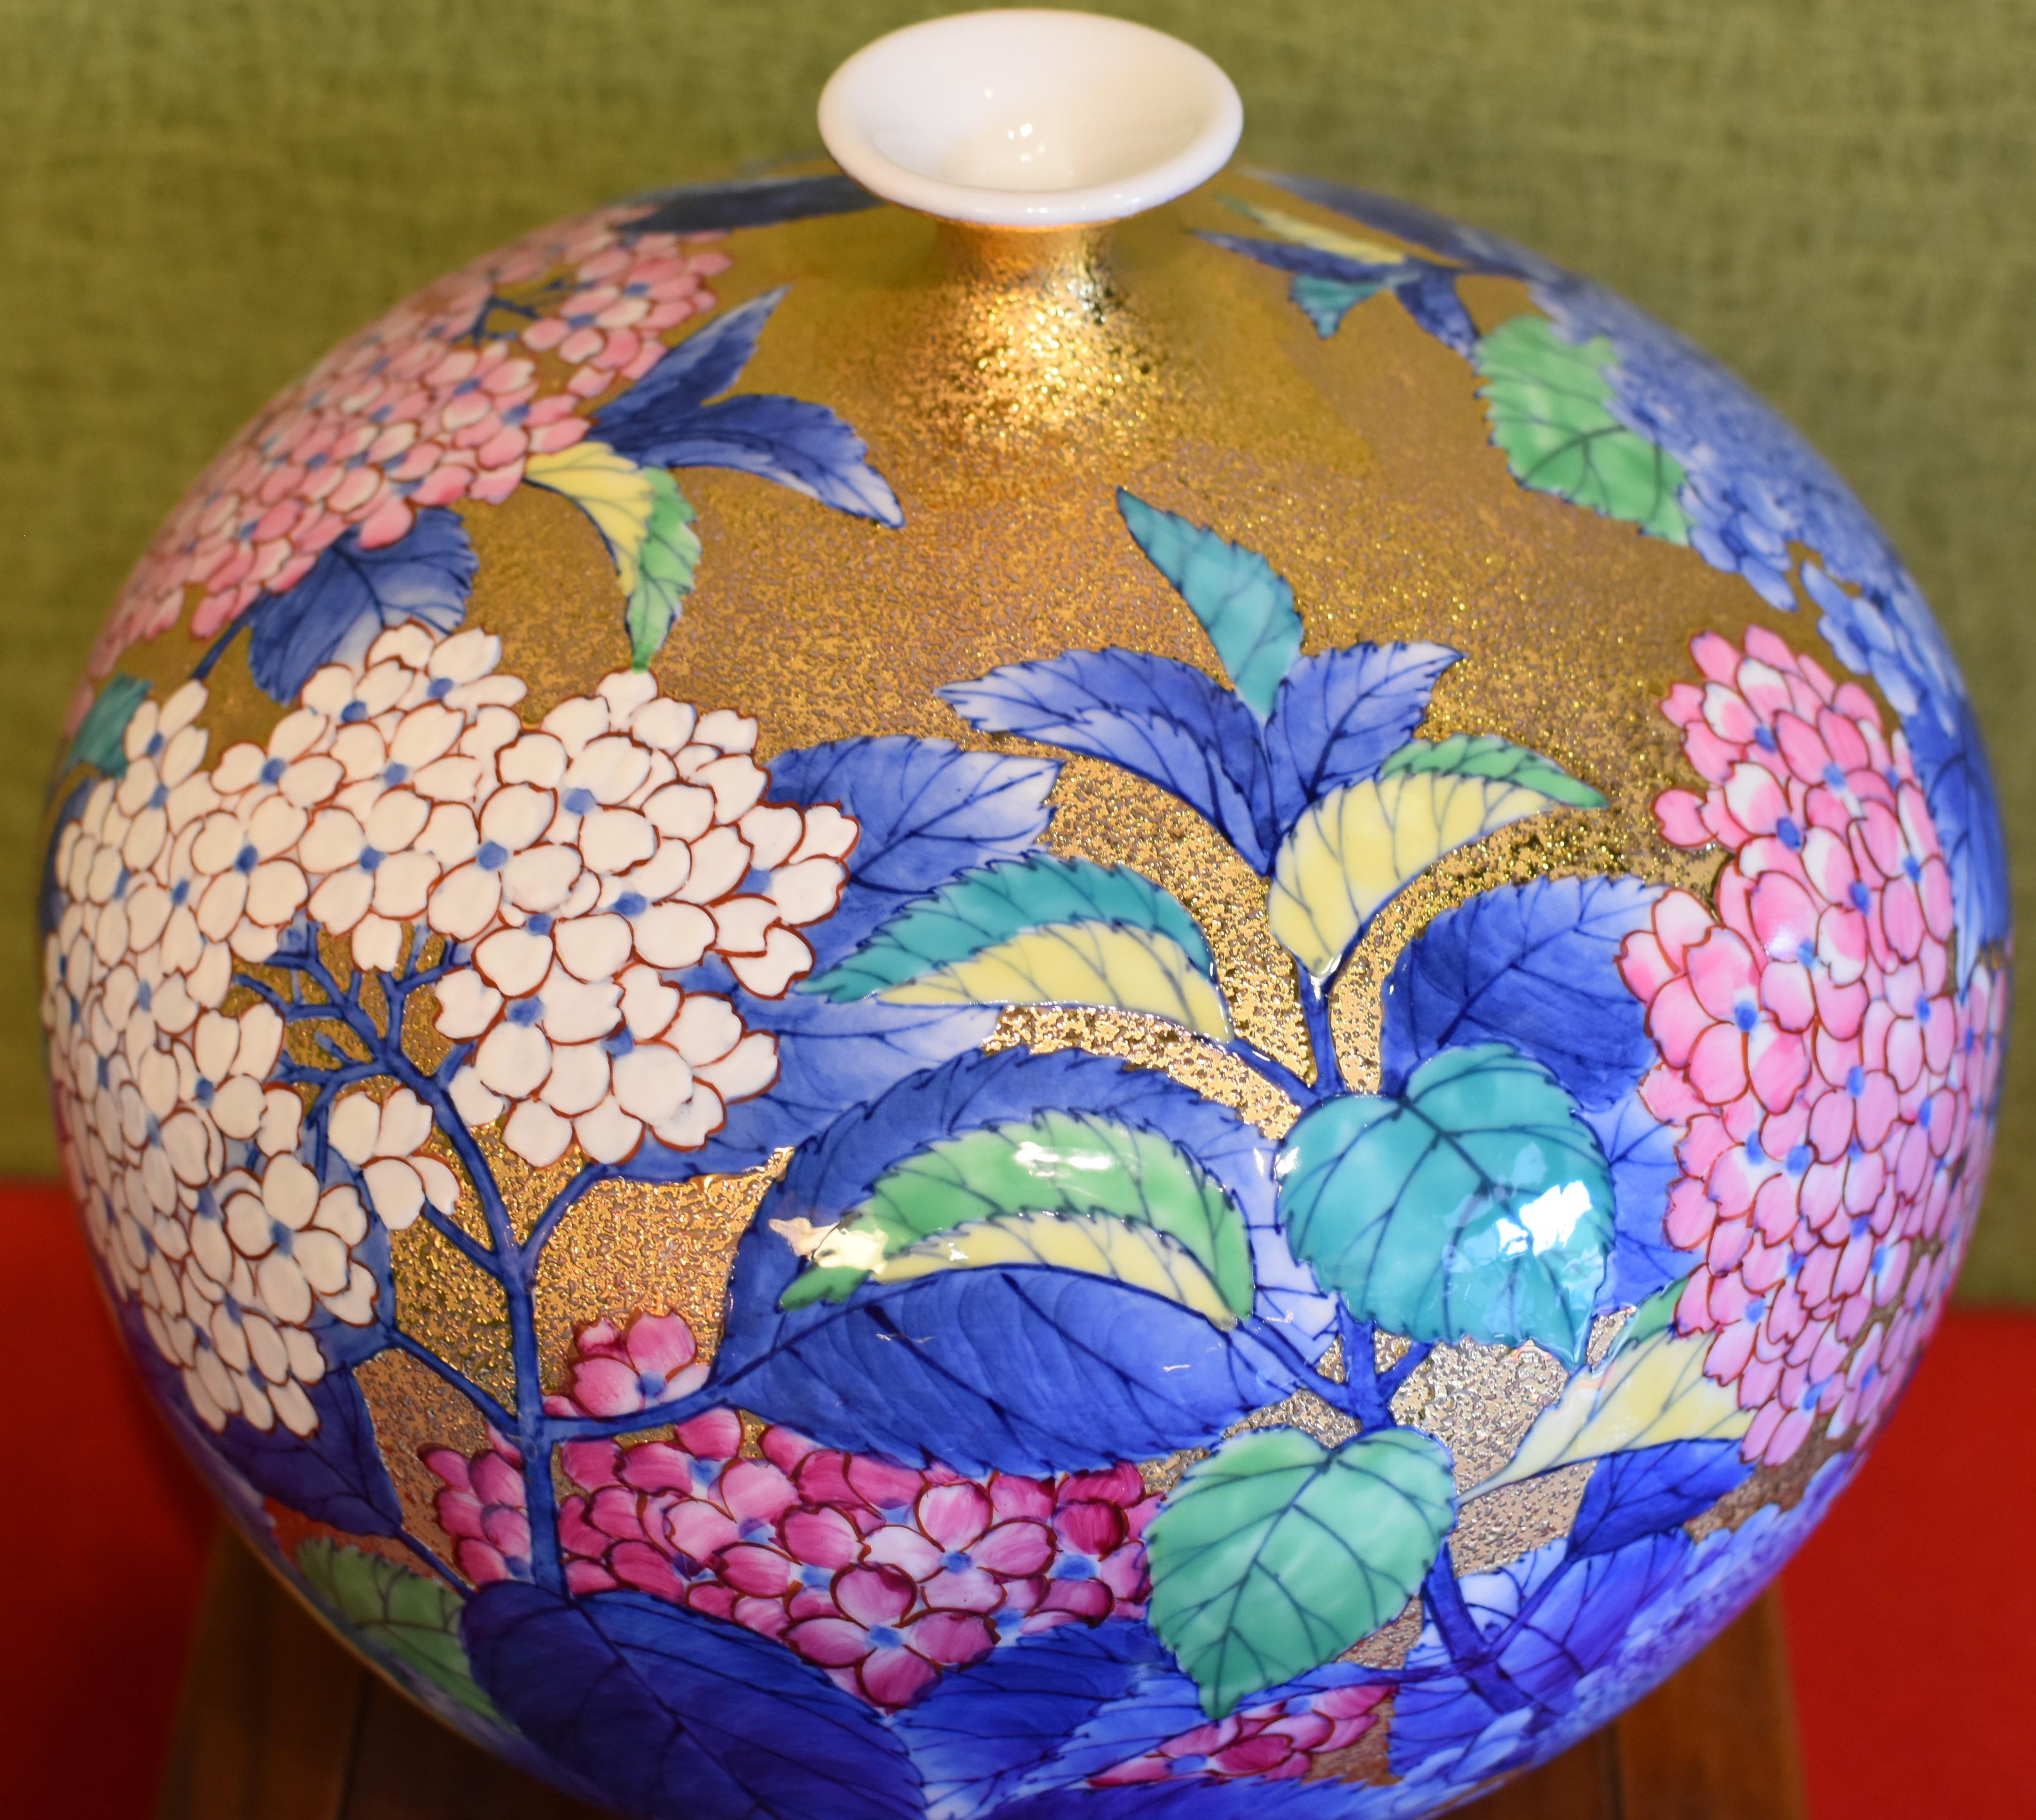 Striking contemporary Imari gilded porcelain vase, hand-painted in pink, red and white on an attractive gilded ovoid shape body. This piece is a work of highly respected award-winning master porcelain artist from Imari-Arita region of Japan.
This